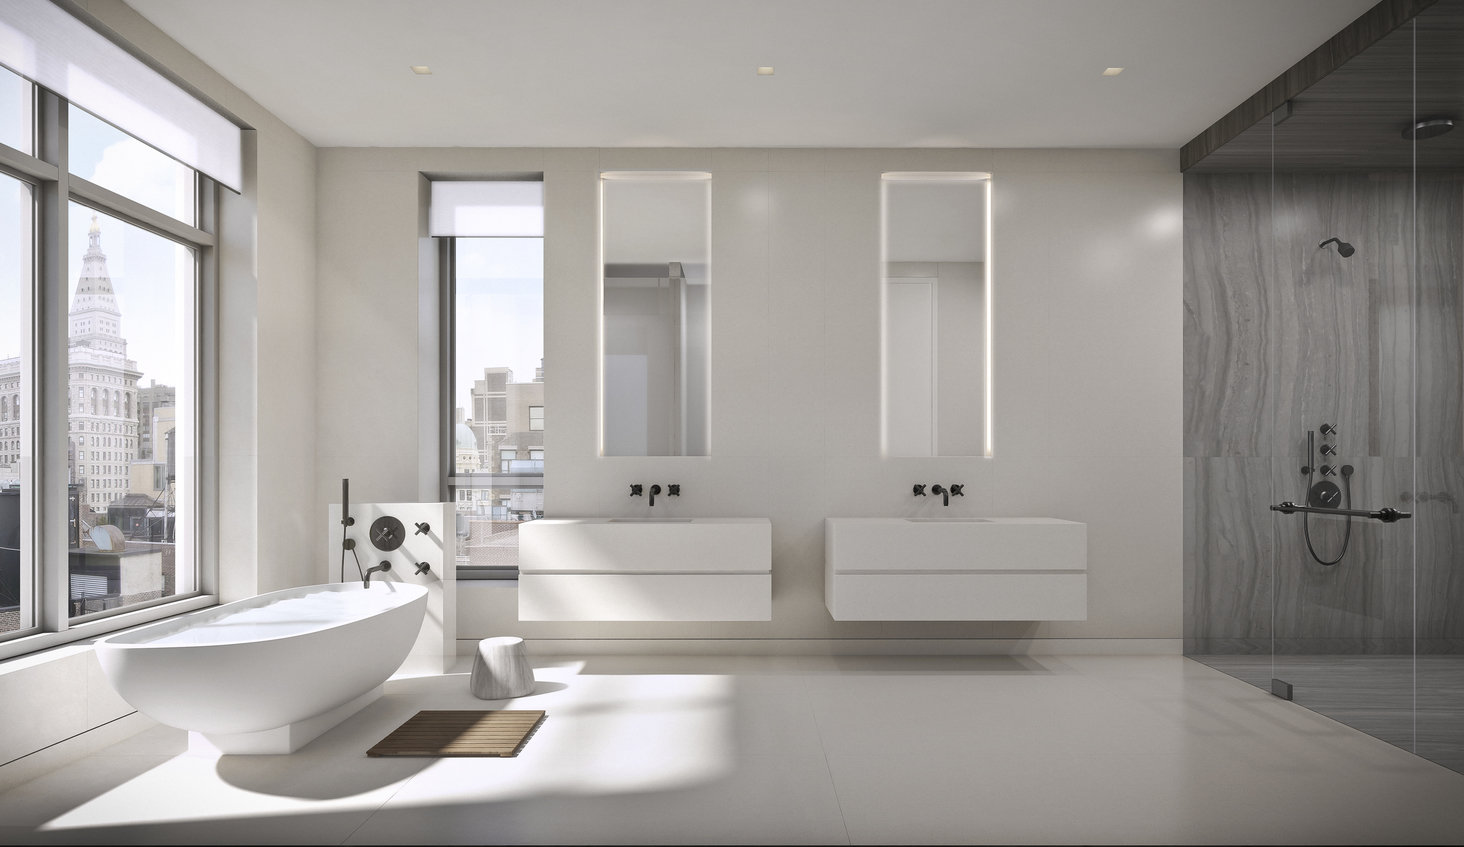 Modern primary bathroom in white and gray with standing shower on a marble wall, soaking tub, pair of wall-mounted vanities.